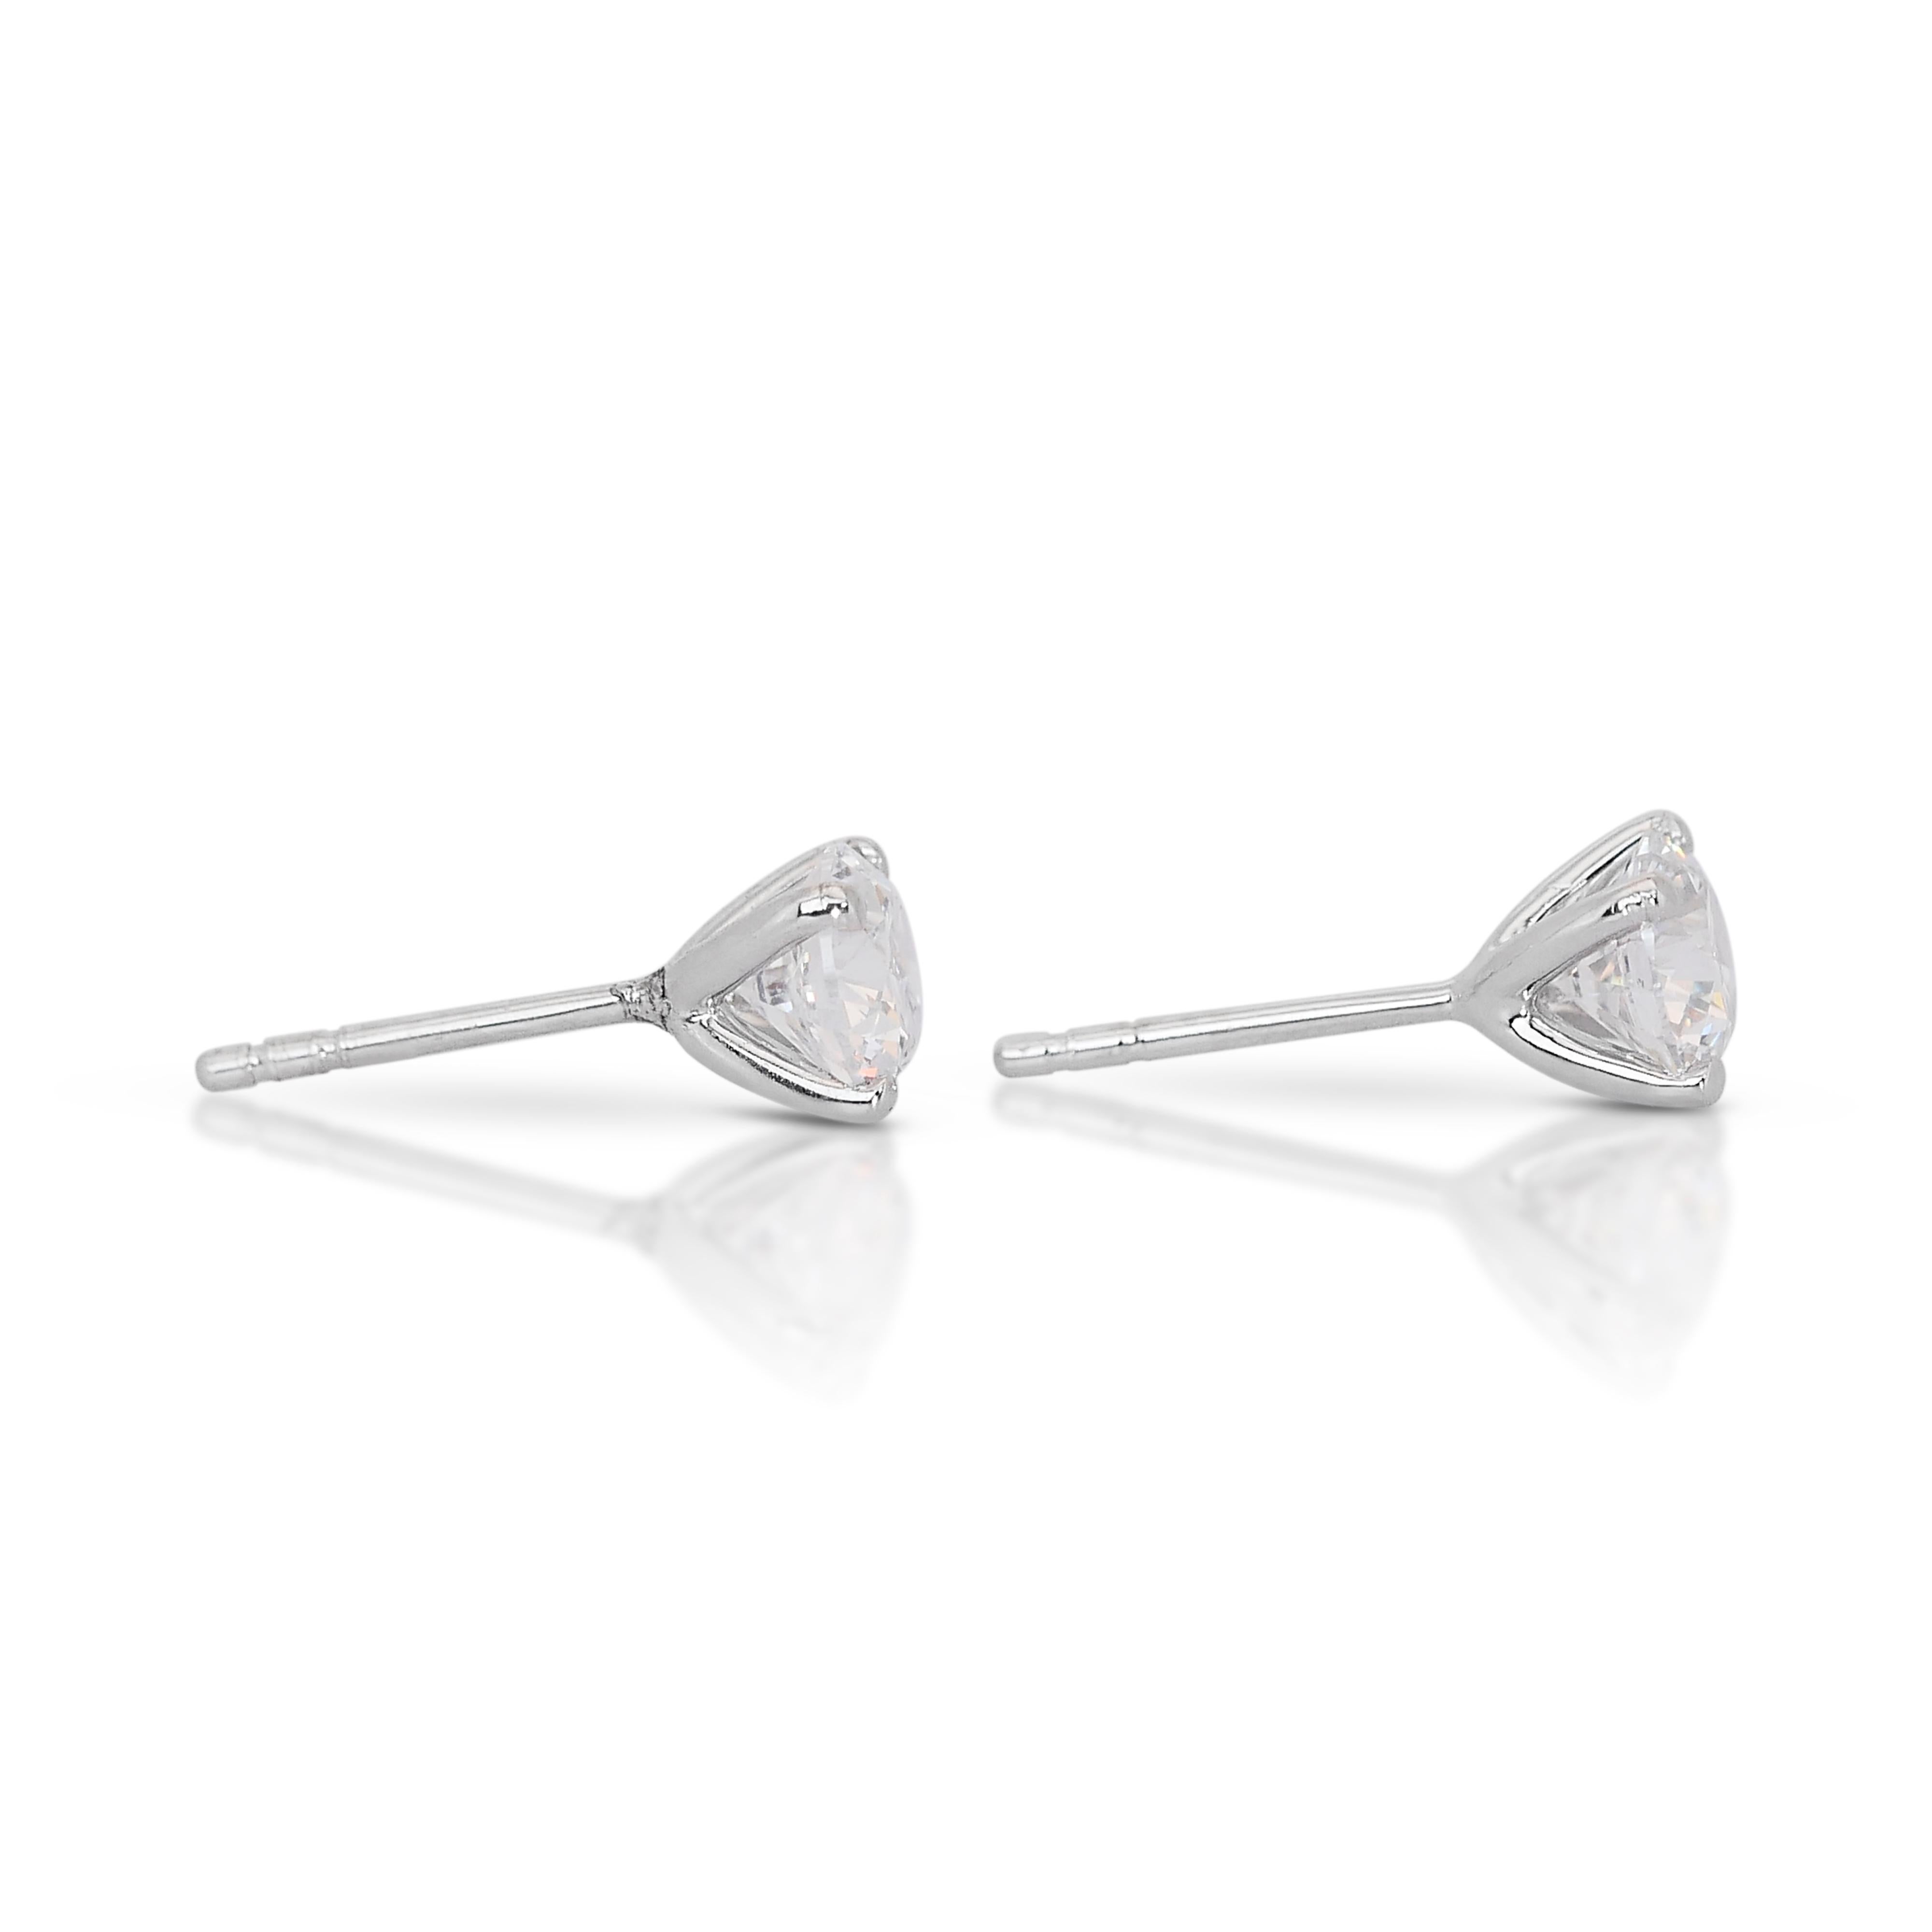 Gleaming 18K White Gold Diamond Stud Earrings with 1.8ct- GIA Certified For Sale 3